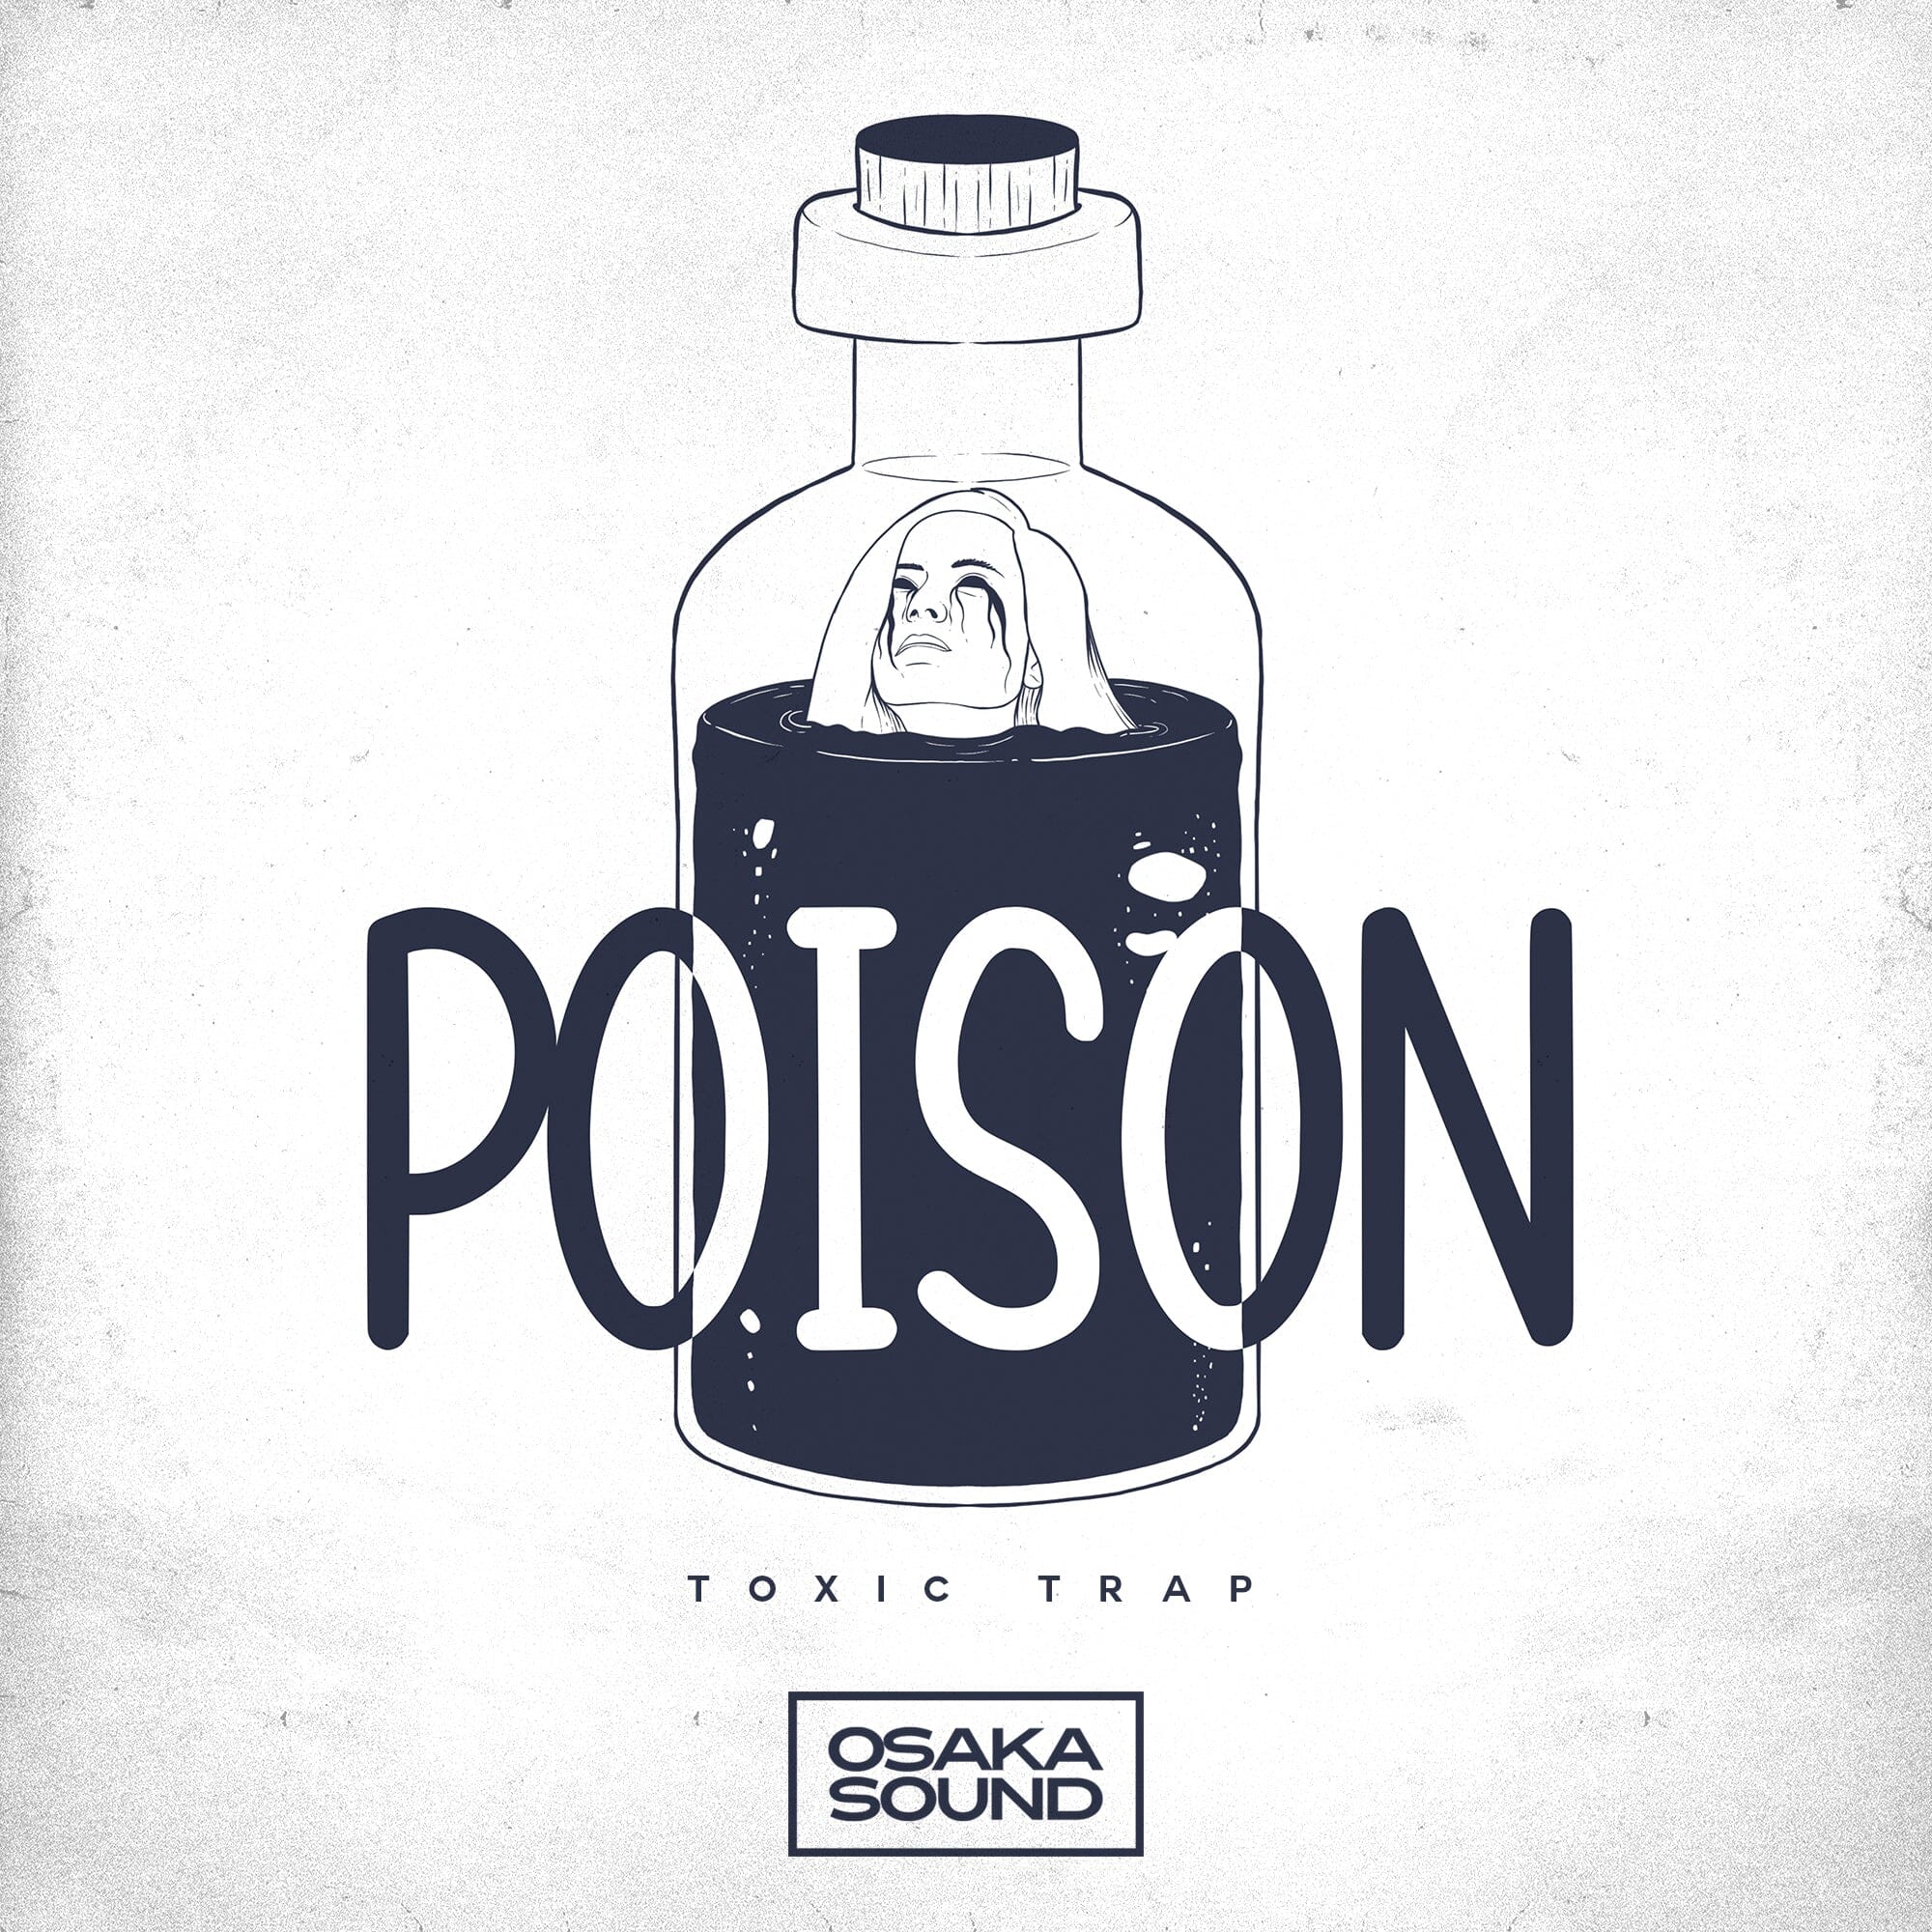 Poison -Toxic Trap - Trap Lo fi Hip Hop (Drum Loops top loop) Sample Pack Osaka Sound